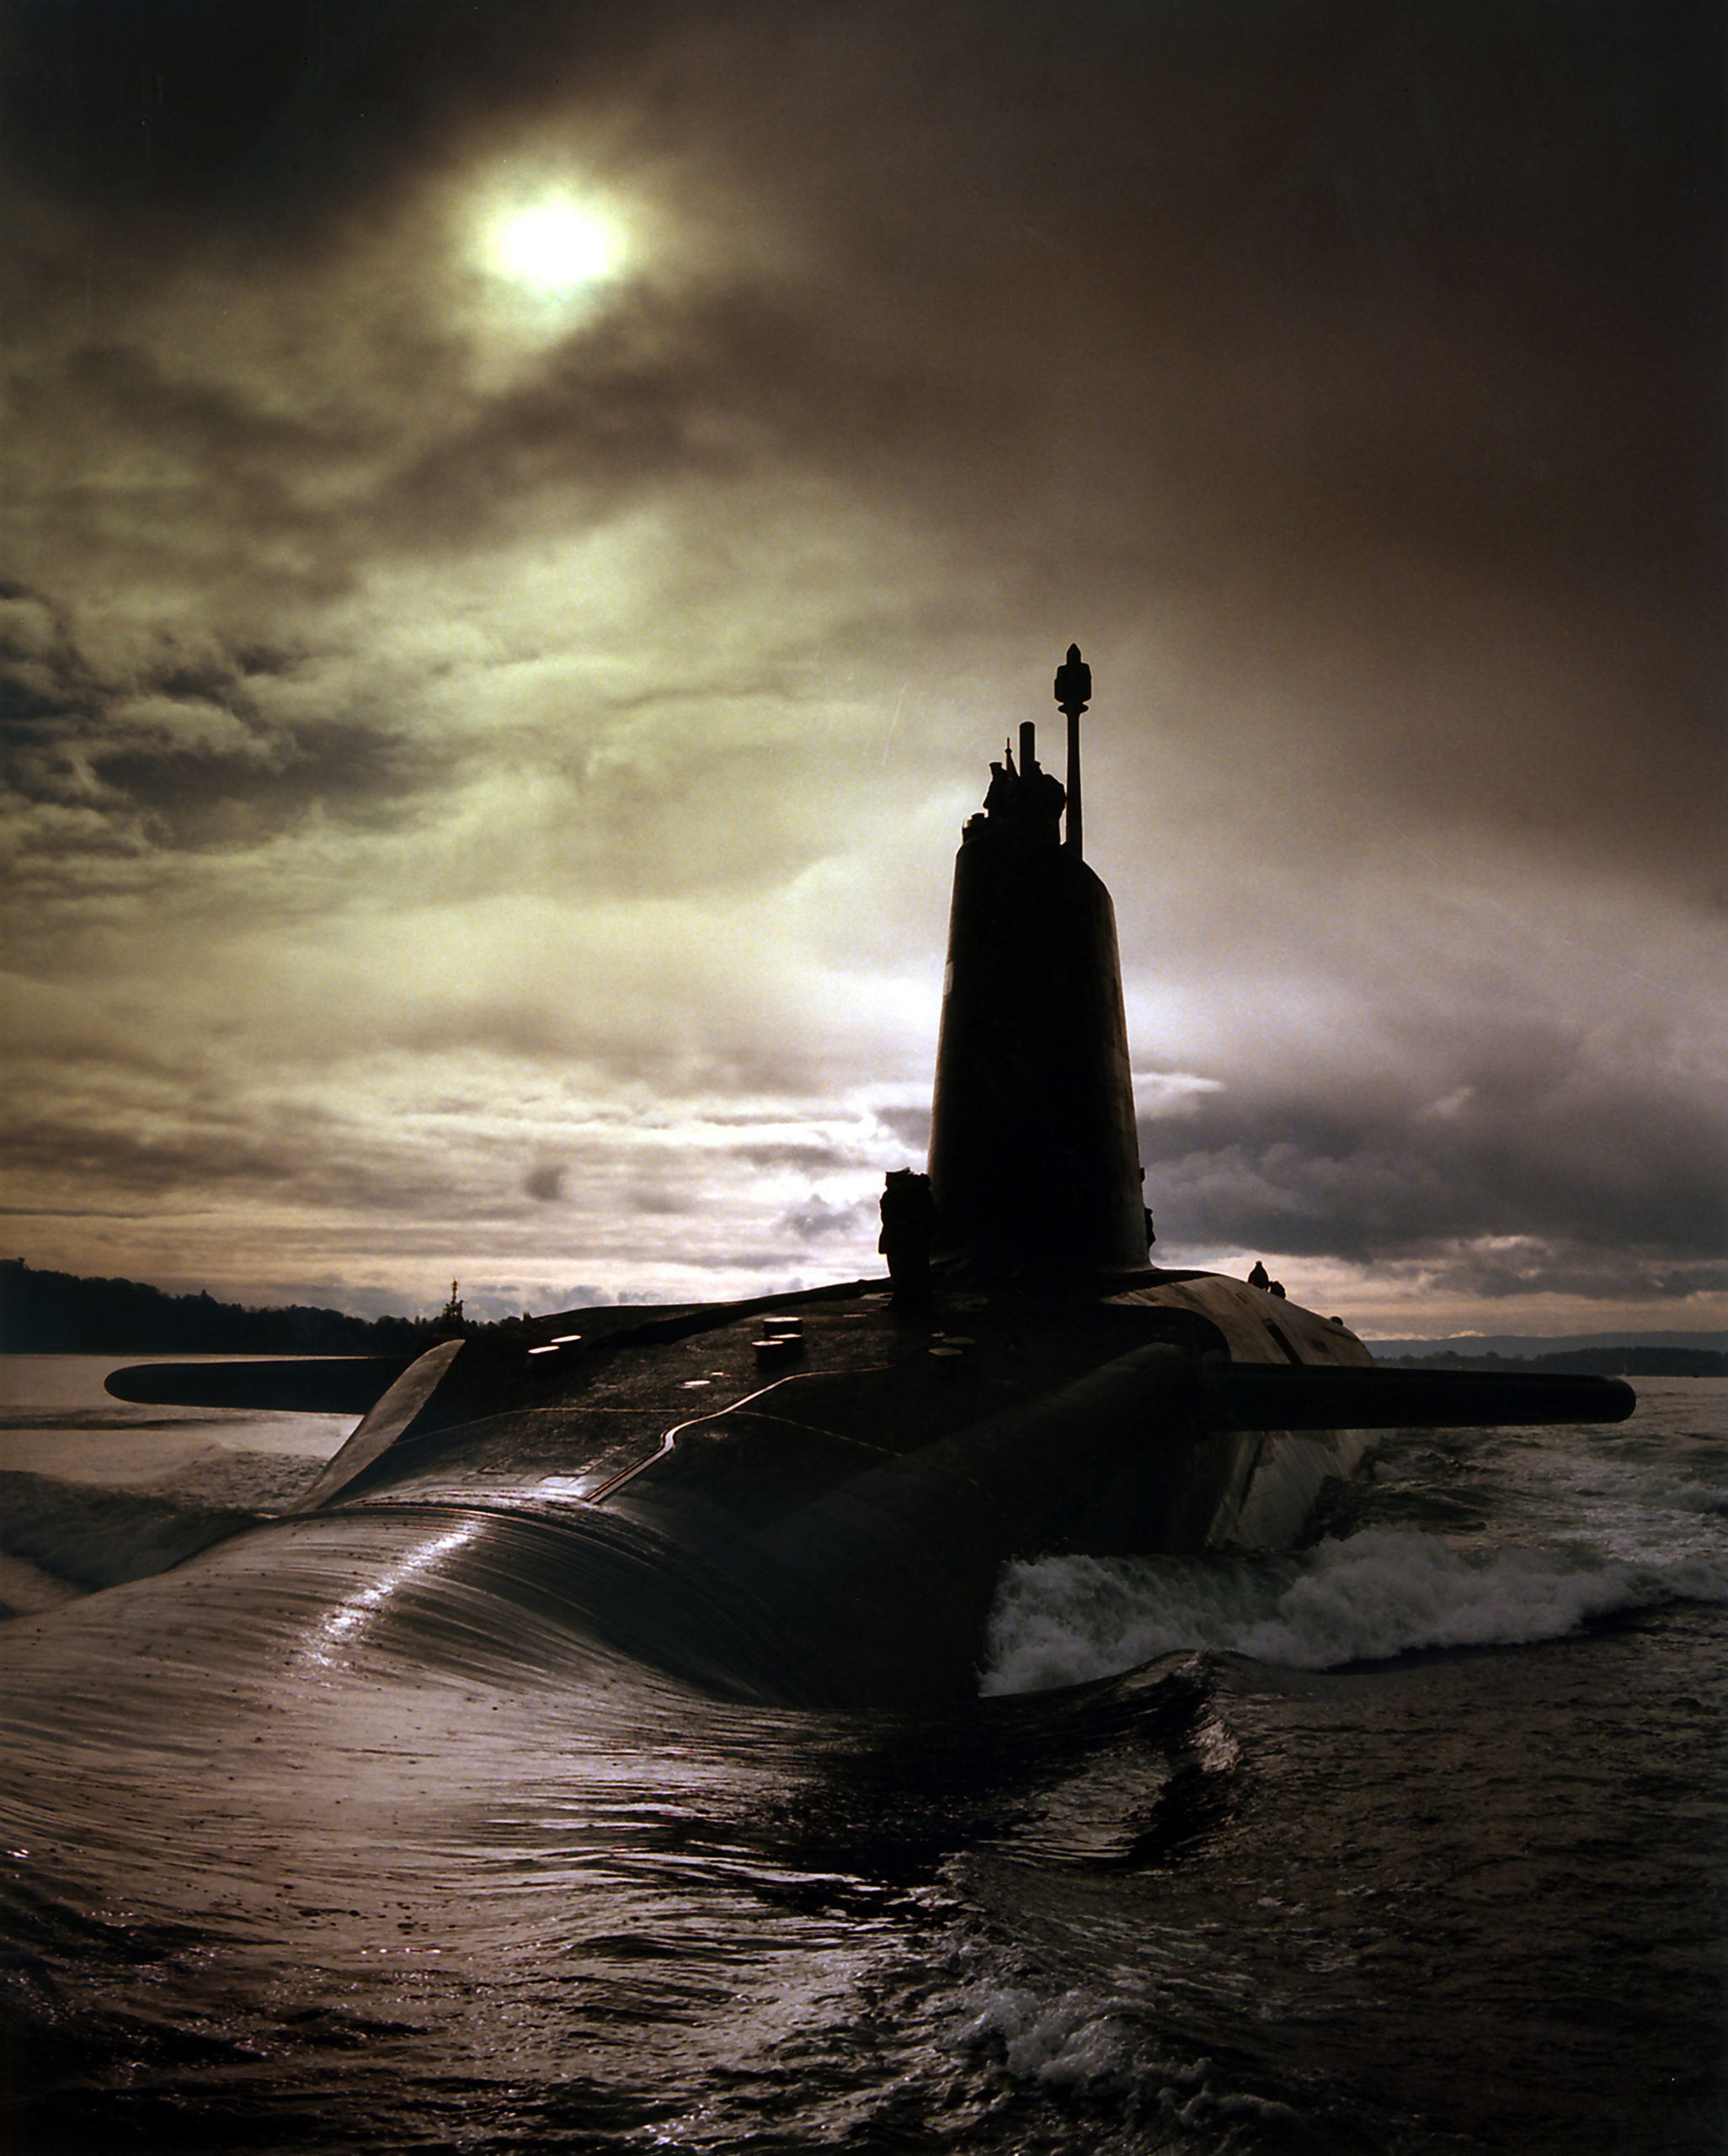 A submarine sails away from the viewer, it's fin silhouetted against a cloudy sky with the sun just distinguishable through the grey.